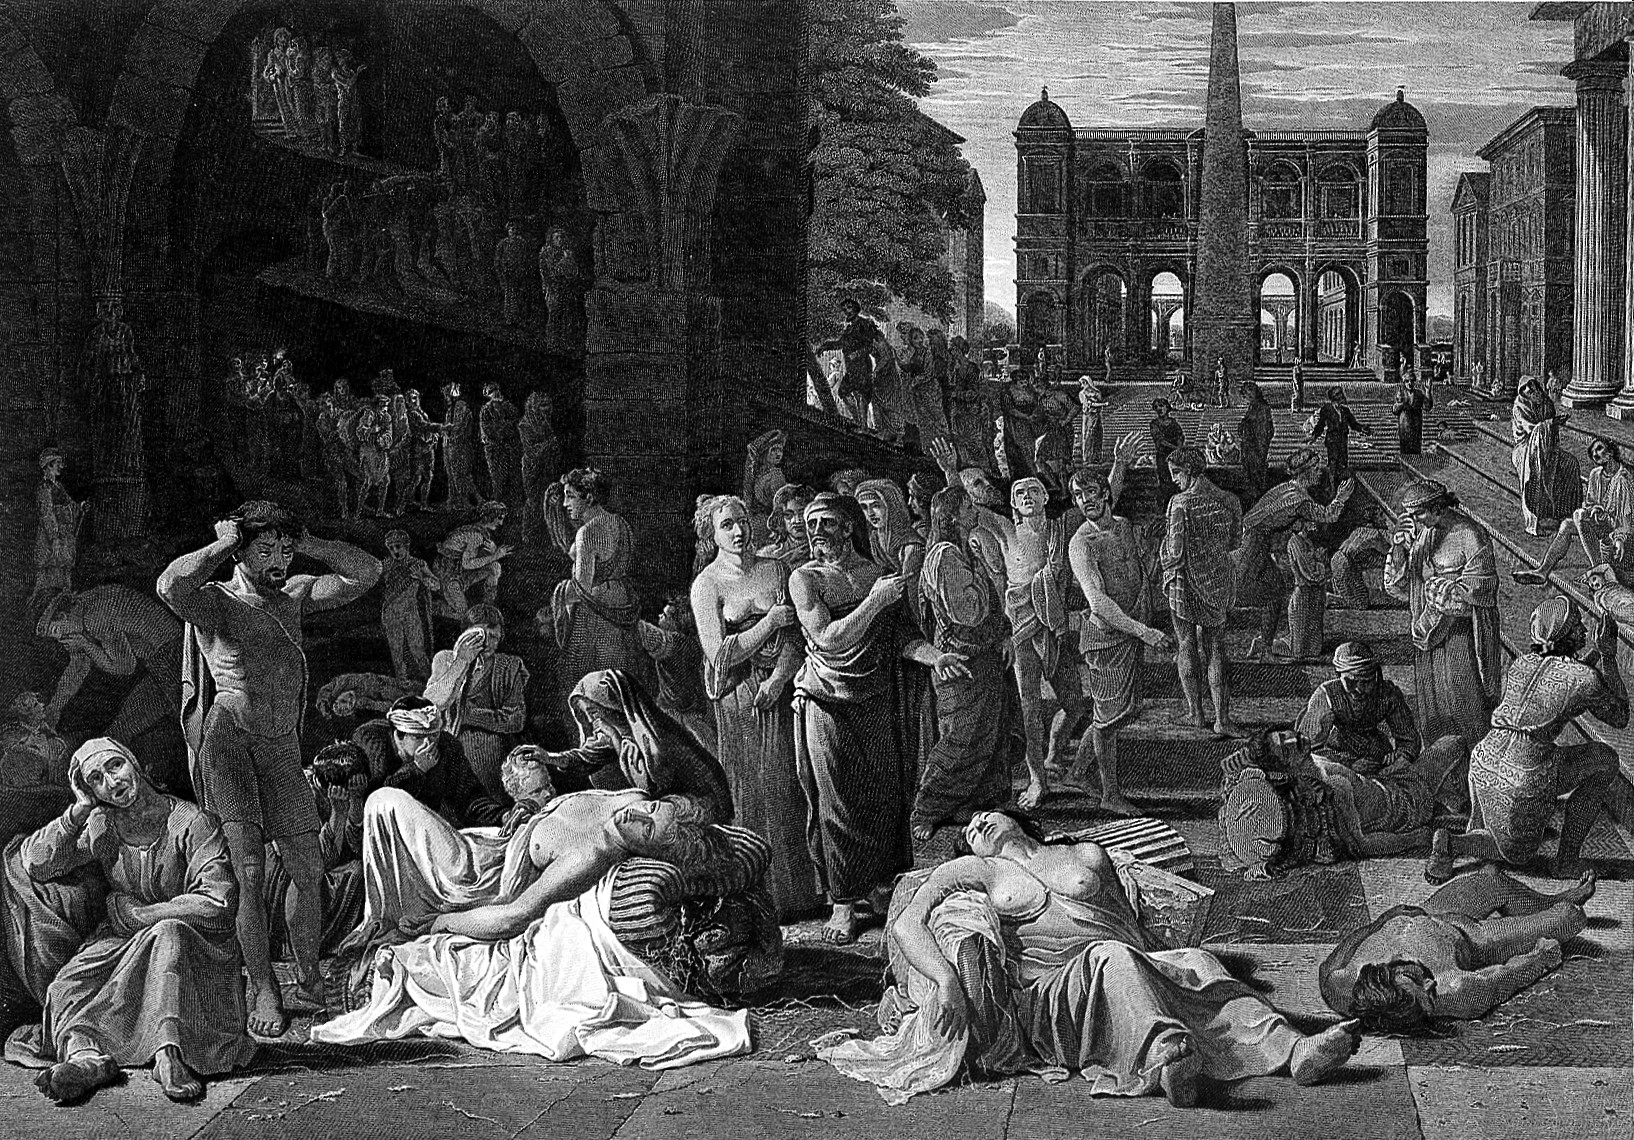 L0004078 The plague of Athens. Line engraving by J. Fittler after M.Credit: Wellcome Library, London. Wellcome Imagesimages@wellcome.ac.ukhttps://wellcomeimages.orgThe plague of Athens. Line engraving by J. Fittler after M. Sweerts.1811 By: Michael Sweertsafter: James FittlerPublished: 1811Copyrighted work available under Creative Commons Attribution only licence CC BY 4.0 https://creativecommons.org/licenses/by/4.0/